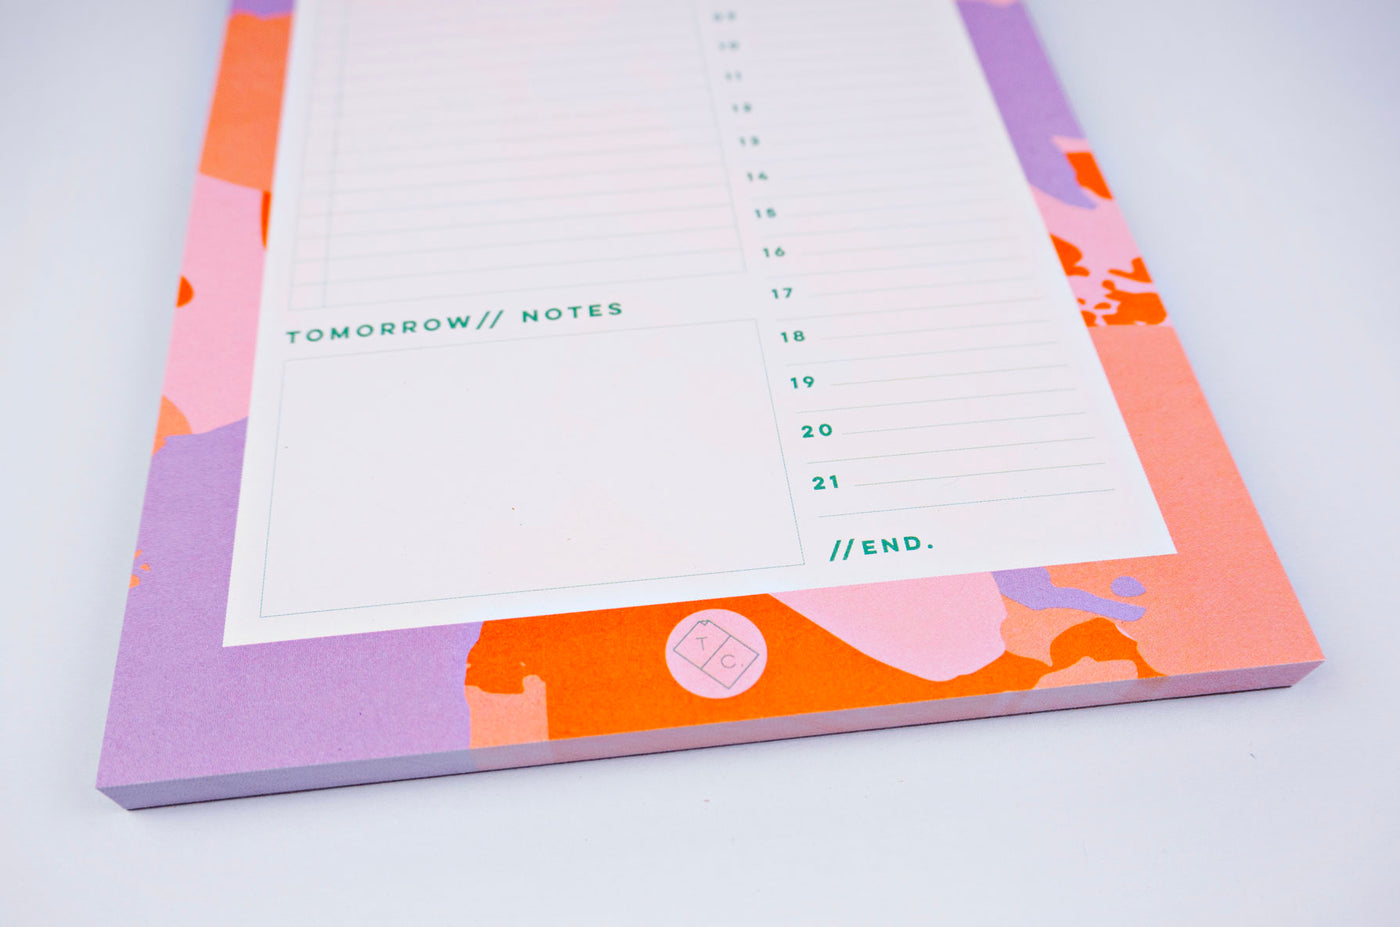 Palette Knife Daily Planner Pad | The Completist | Notepads